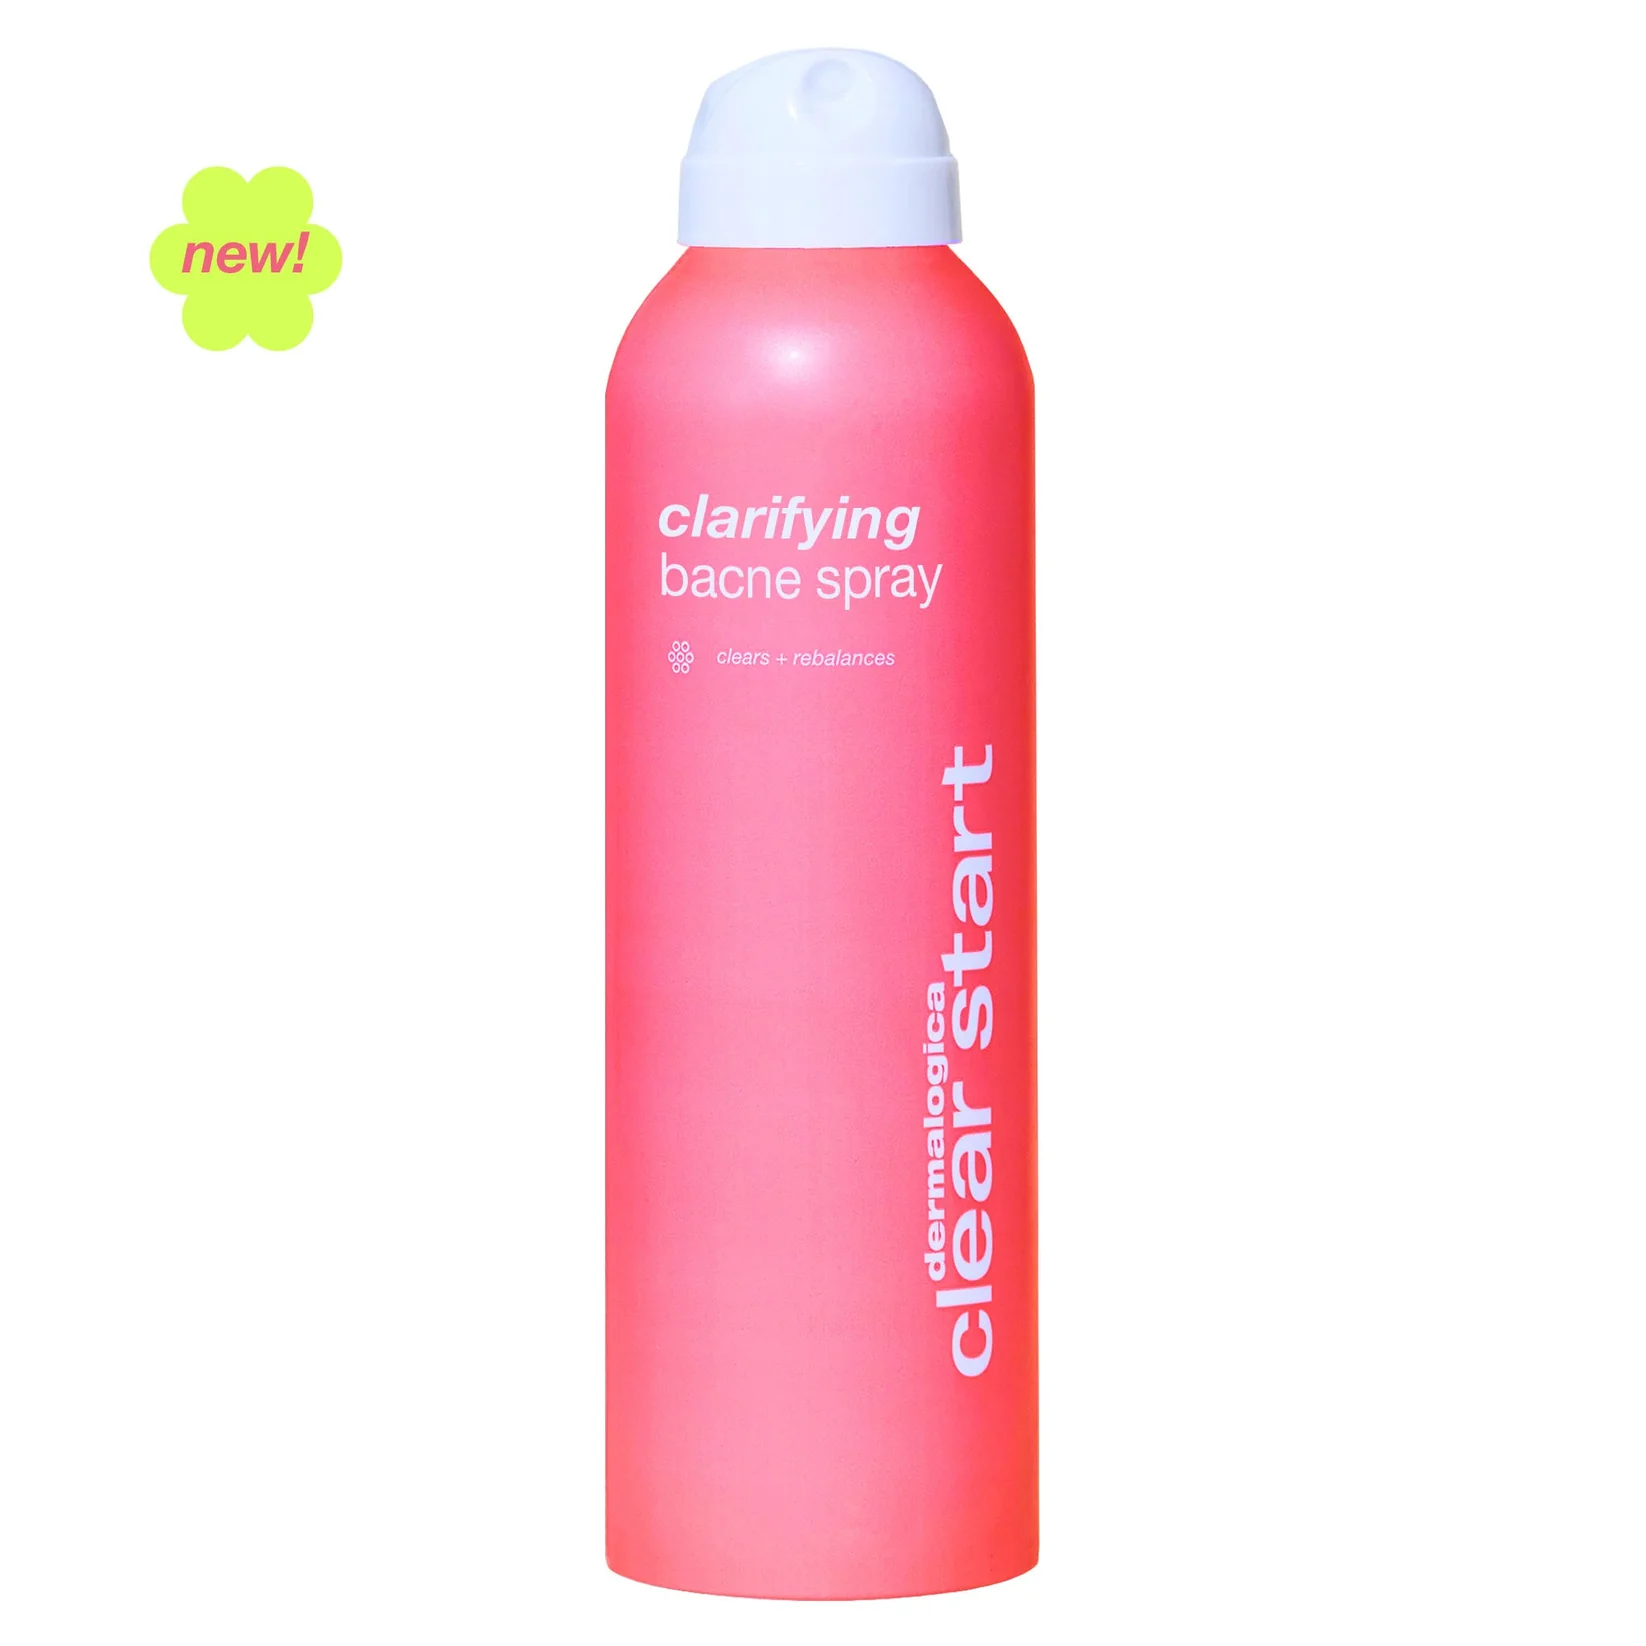 A pink spray bottle with white cap and yellow label.